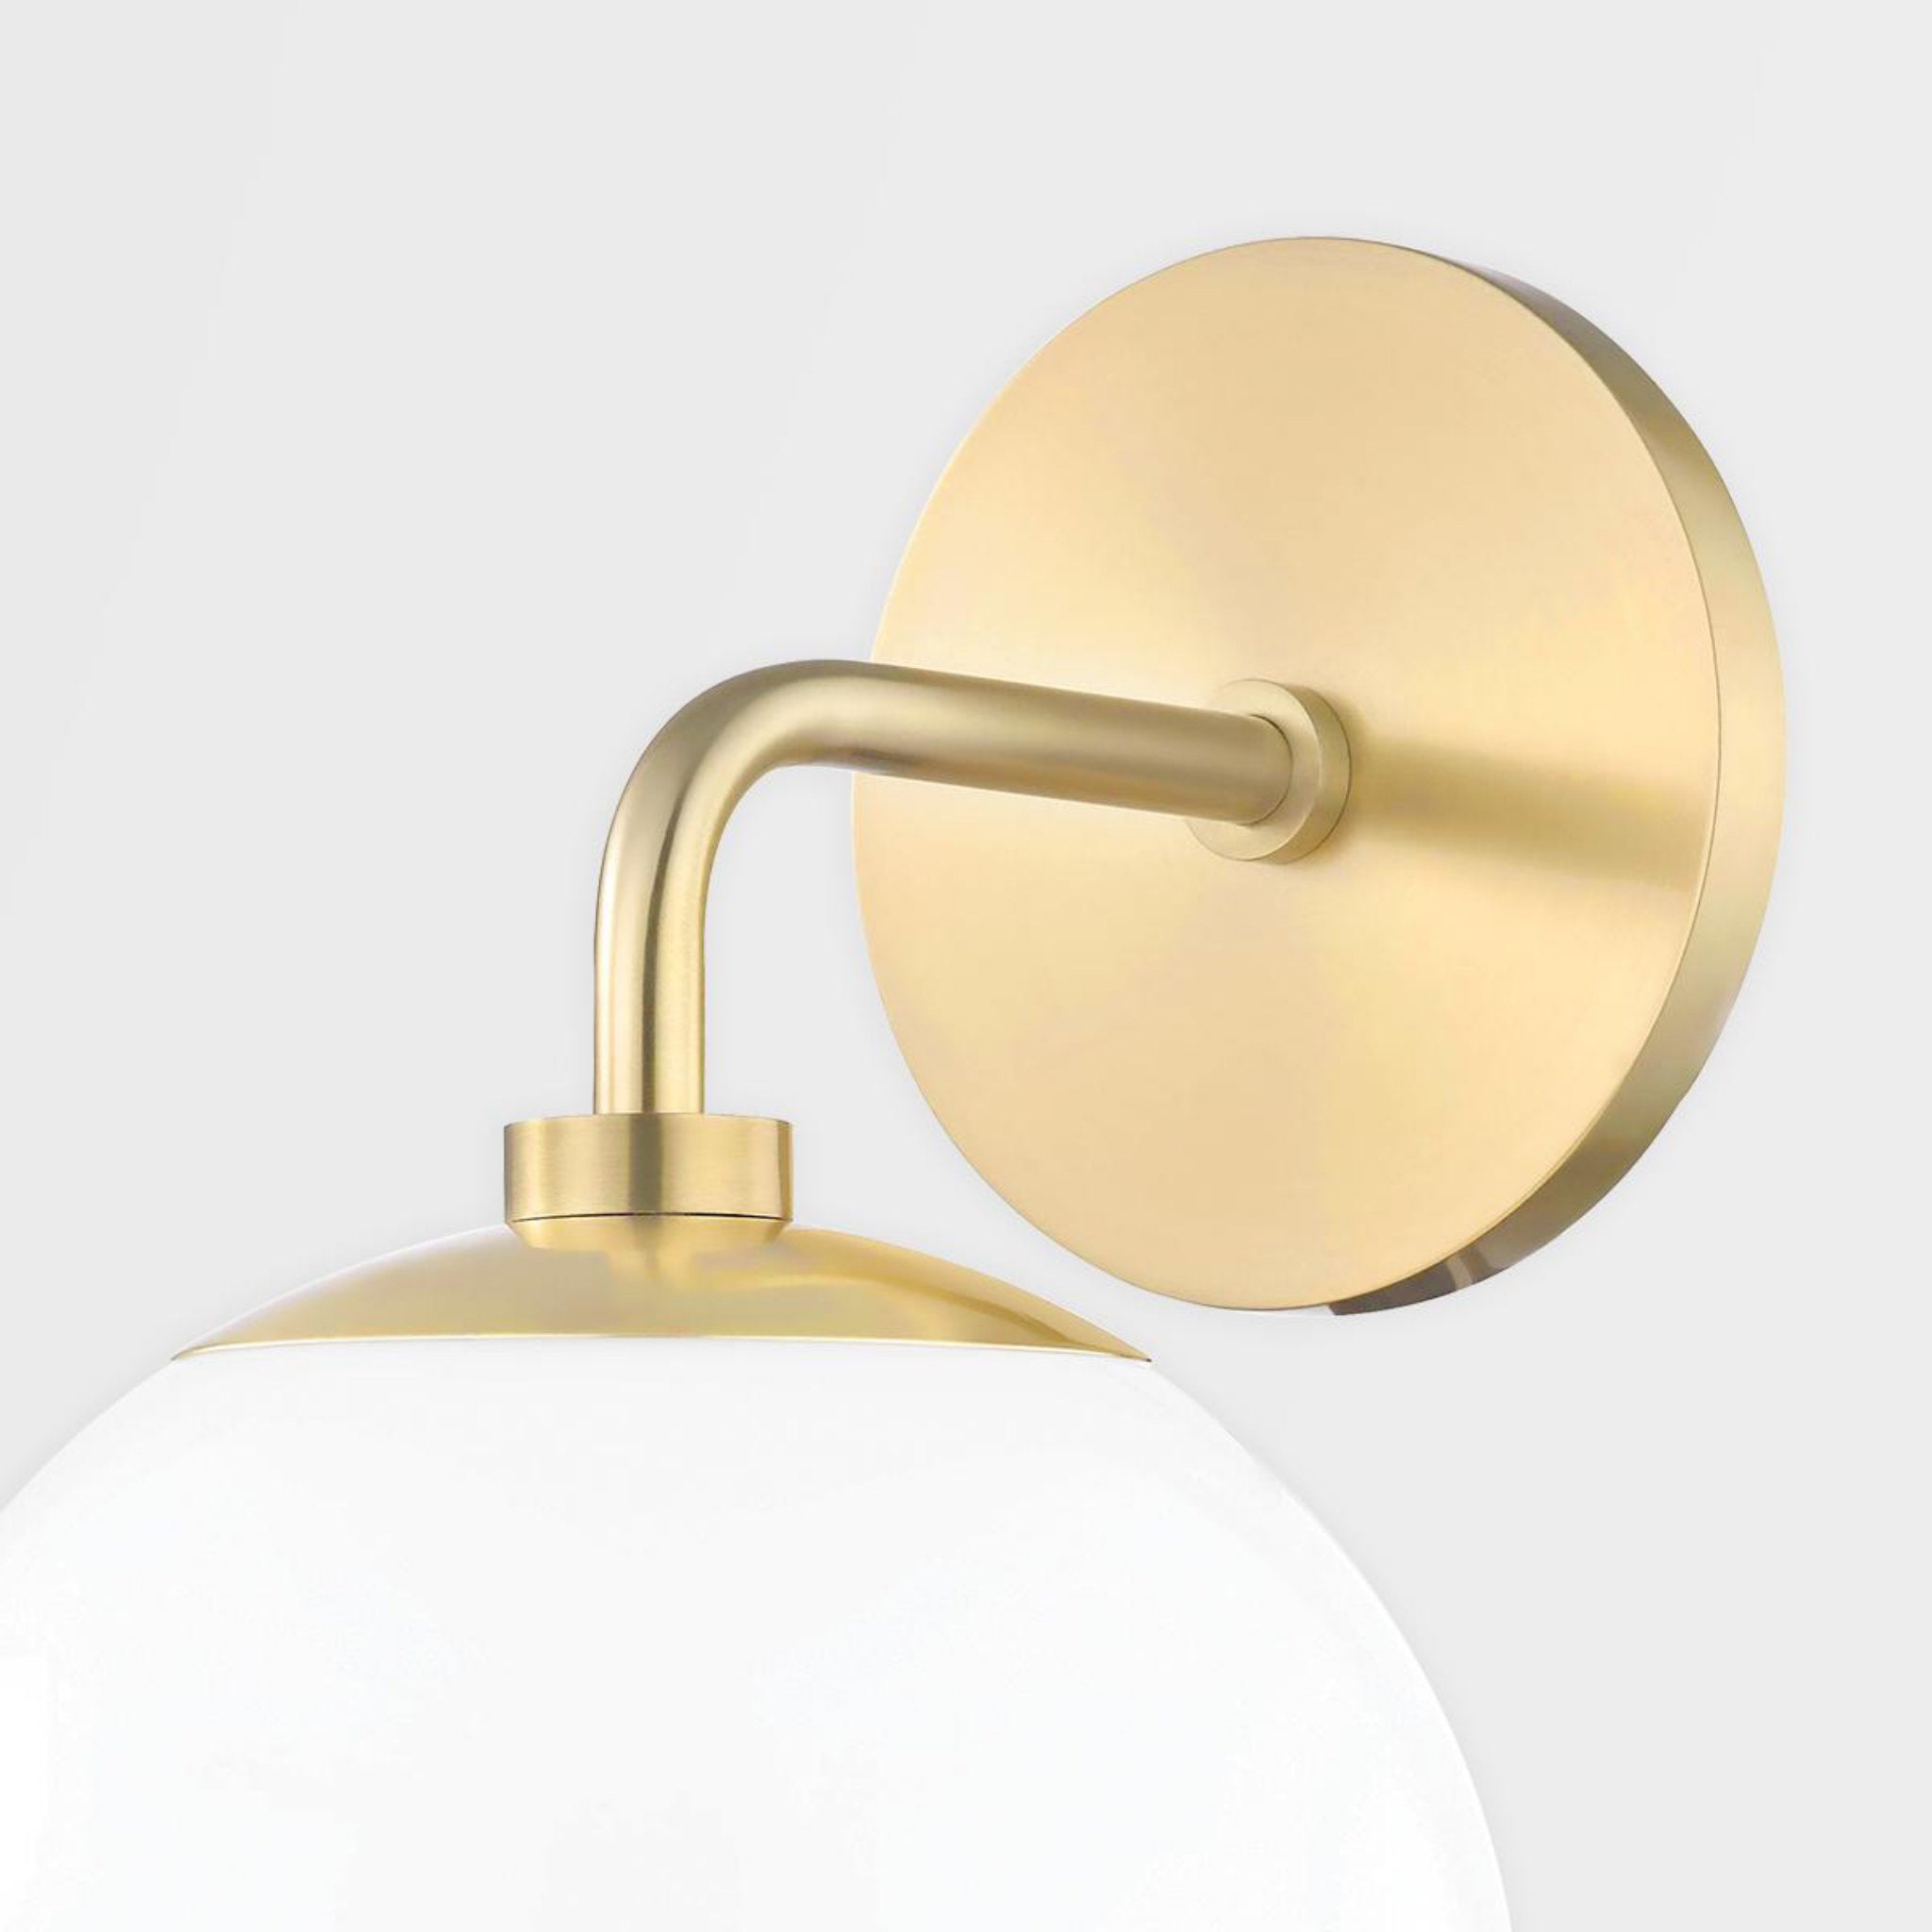 Stella 1-Light Wall Sconce in Polished Nickel